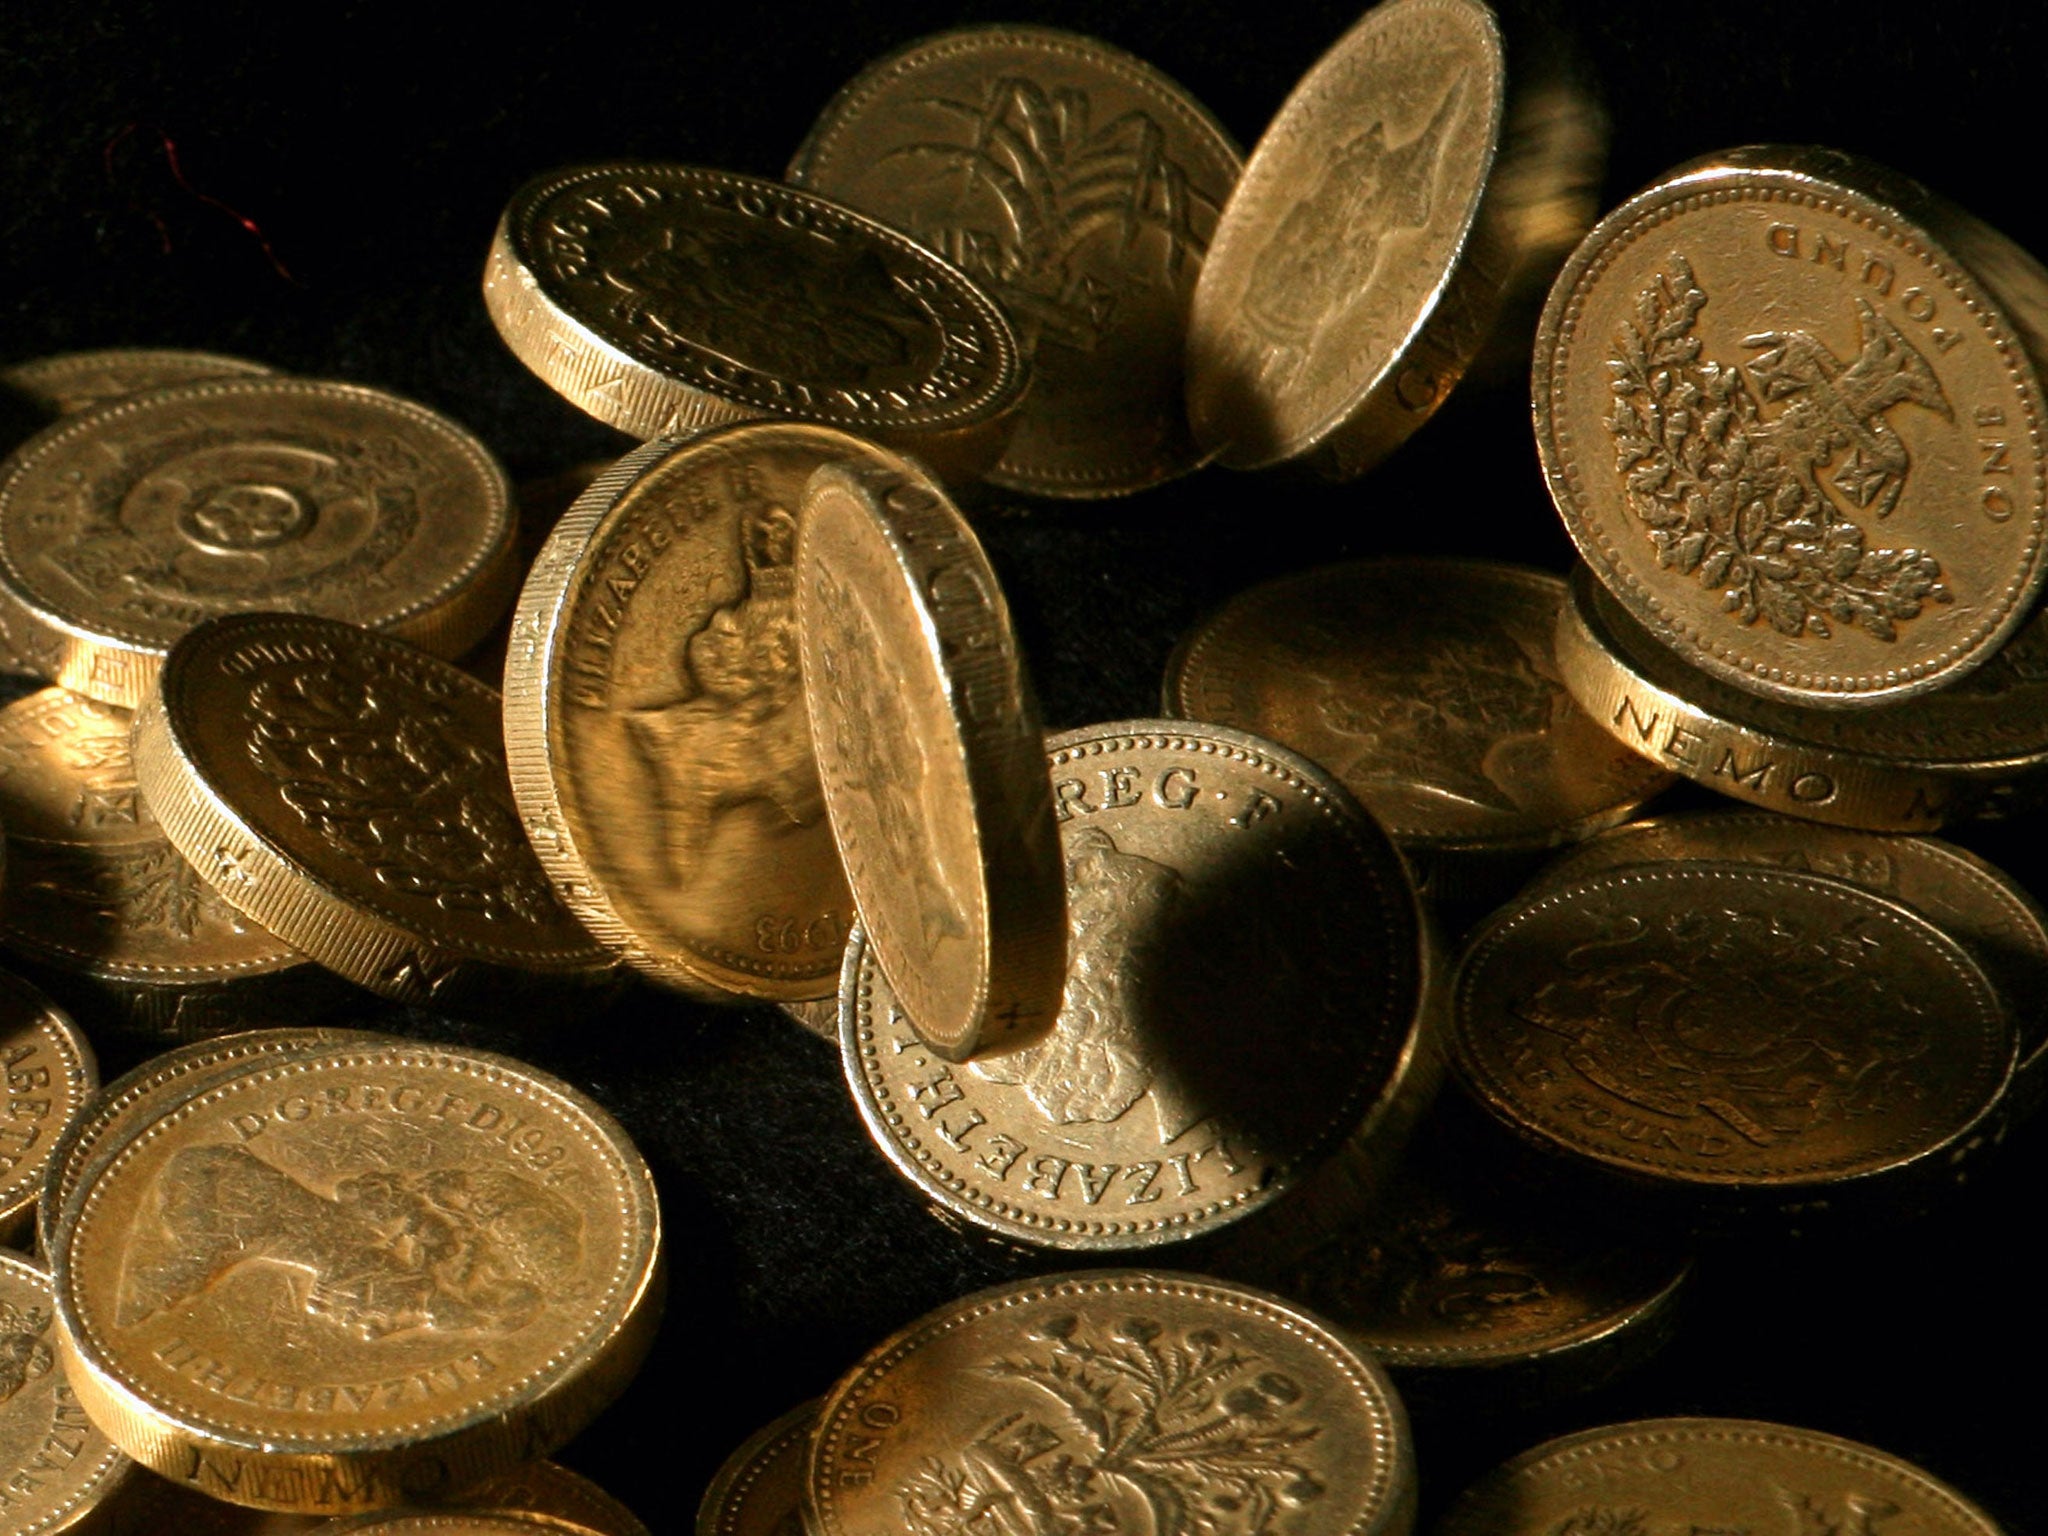 The current UK pound coin was first minted in Llantrisant in 1983